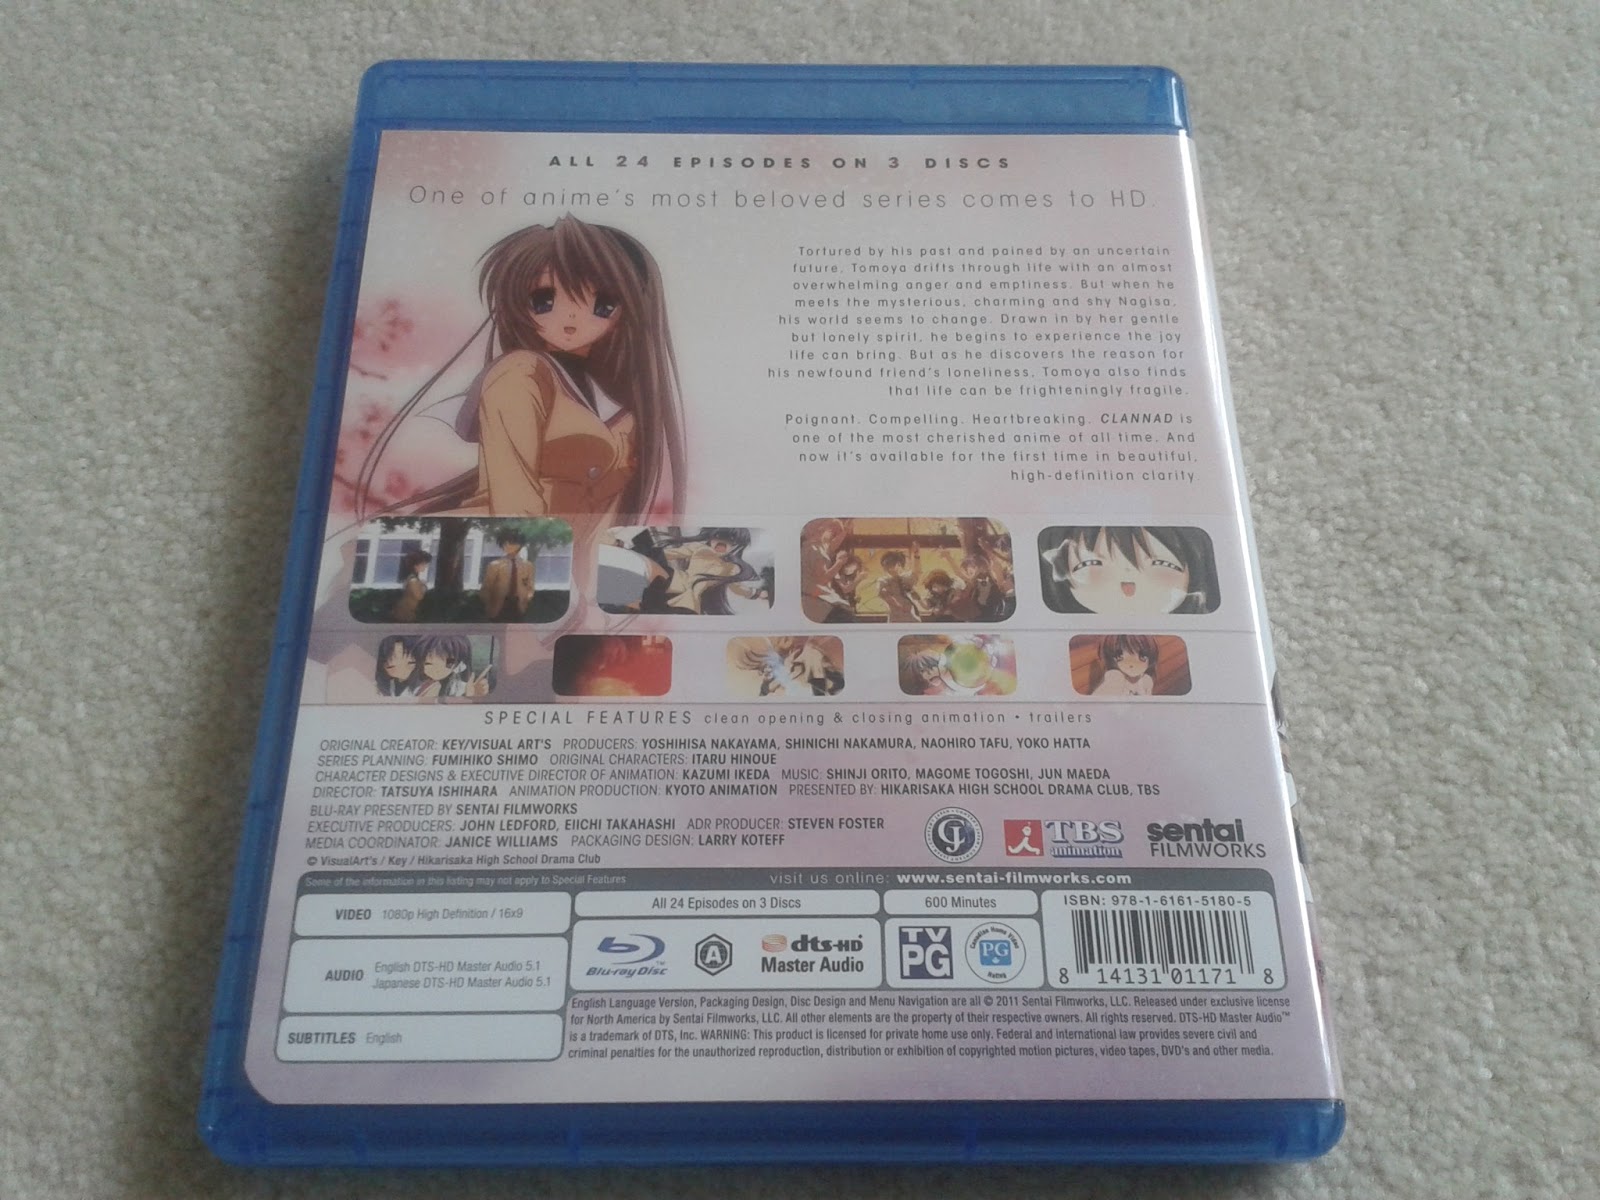 Clannad ~After Story~ Blu-ray Box (First Look, Blu-ray, Japan